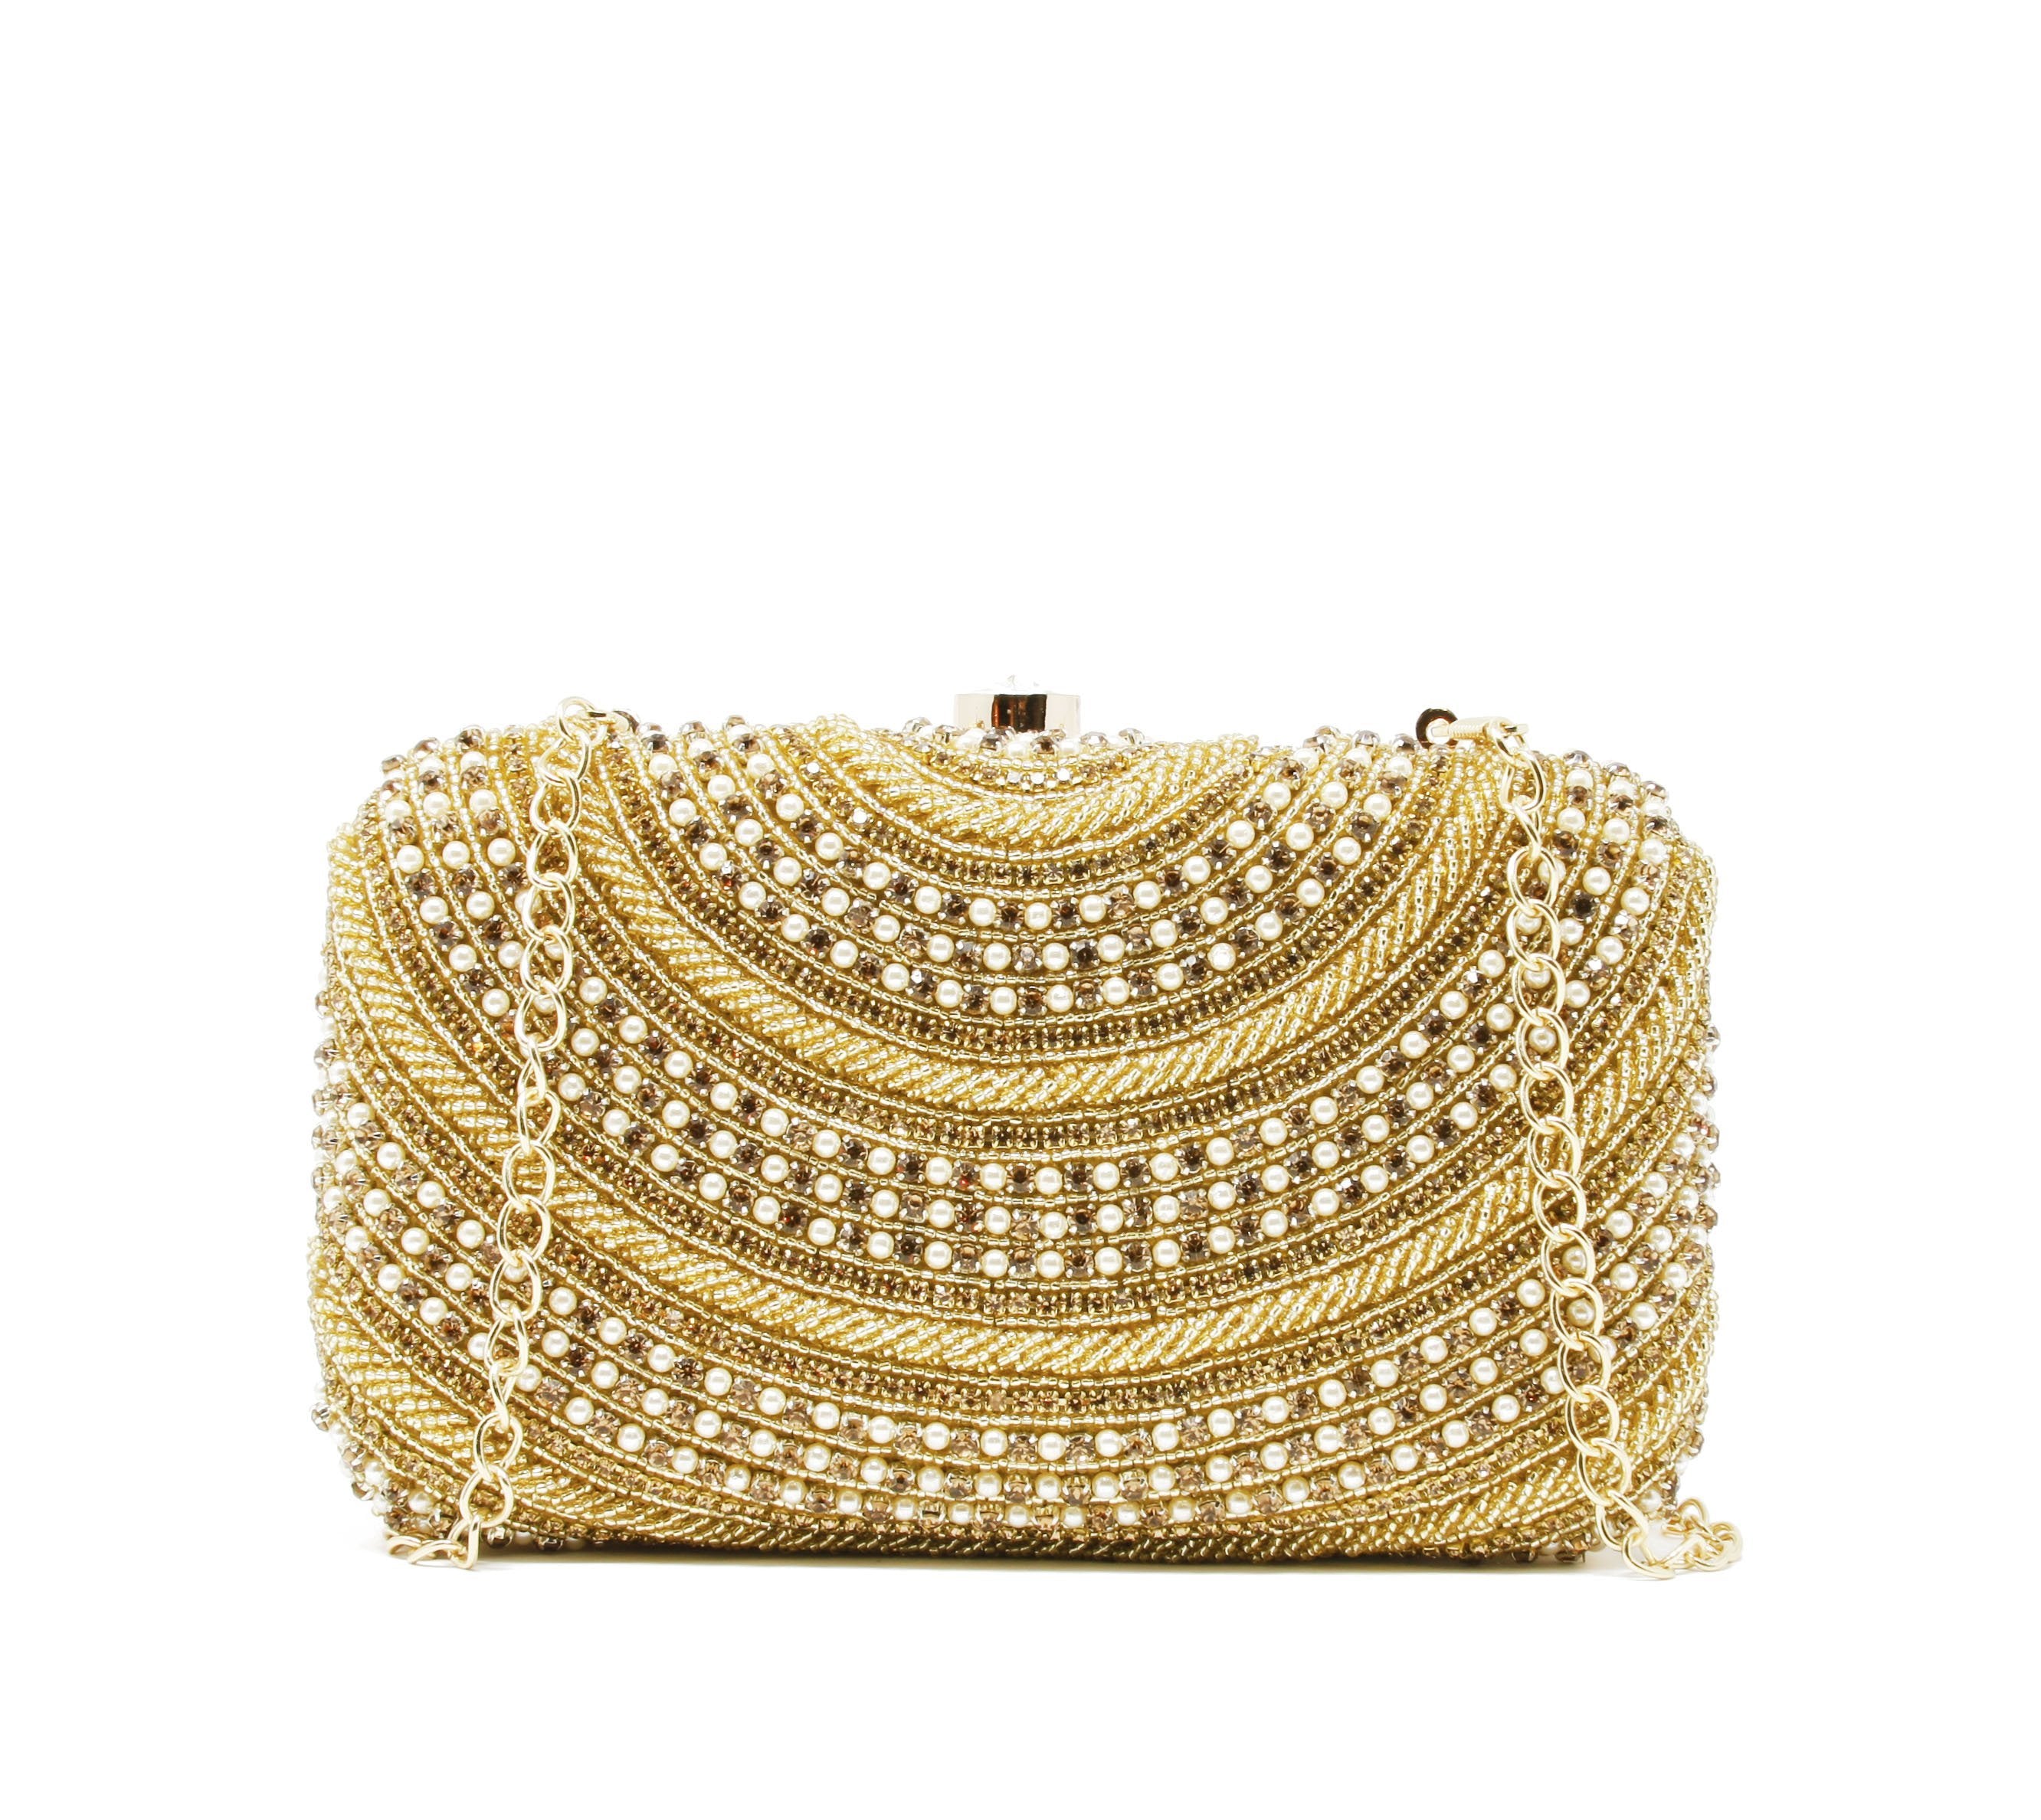 Ivory and gold clutch heavily embroidered with inside pocket